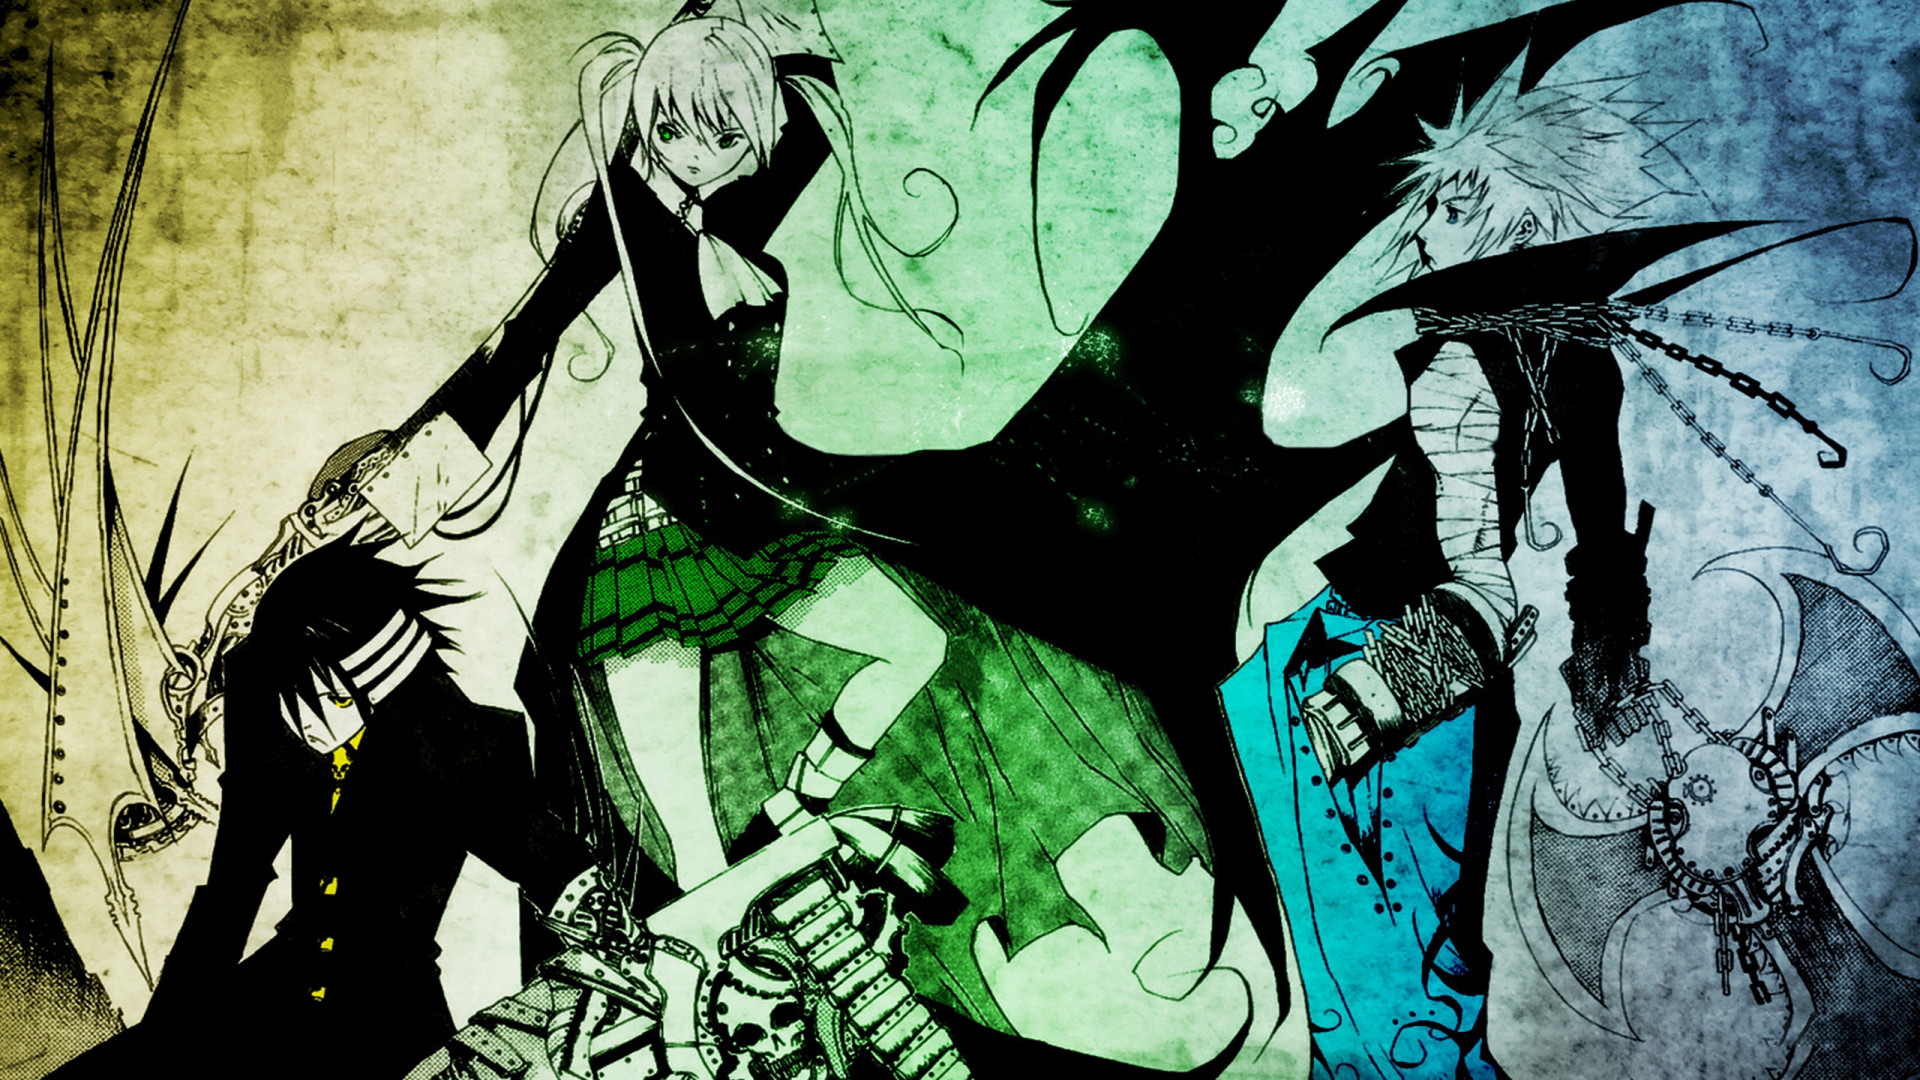 1920x1080 Soul Eater Backgrounds Download 